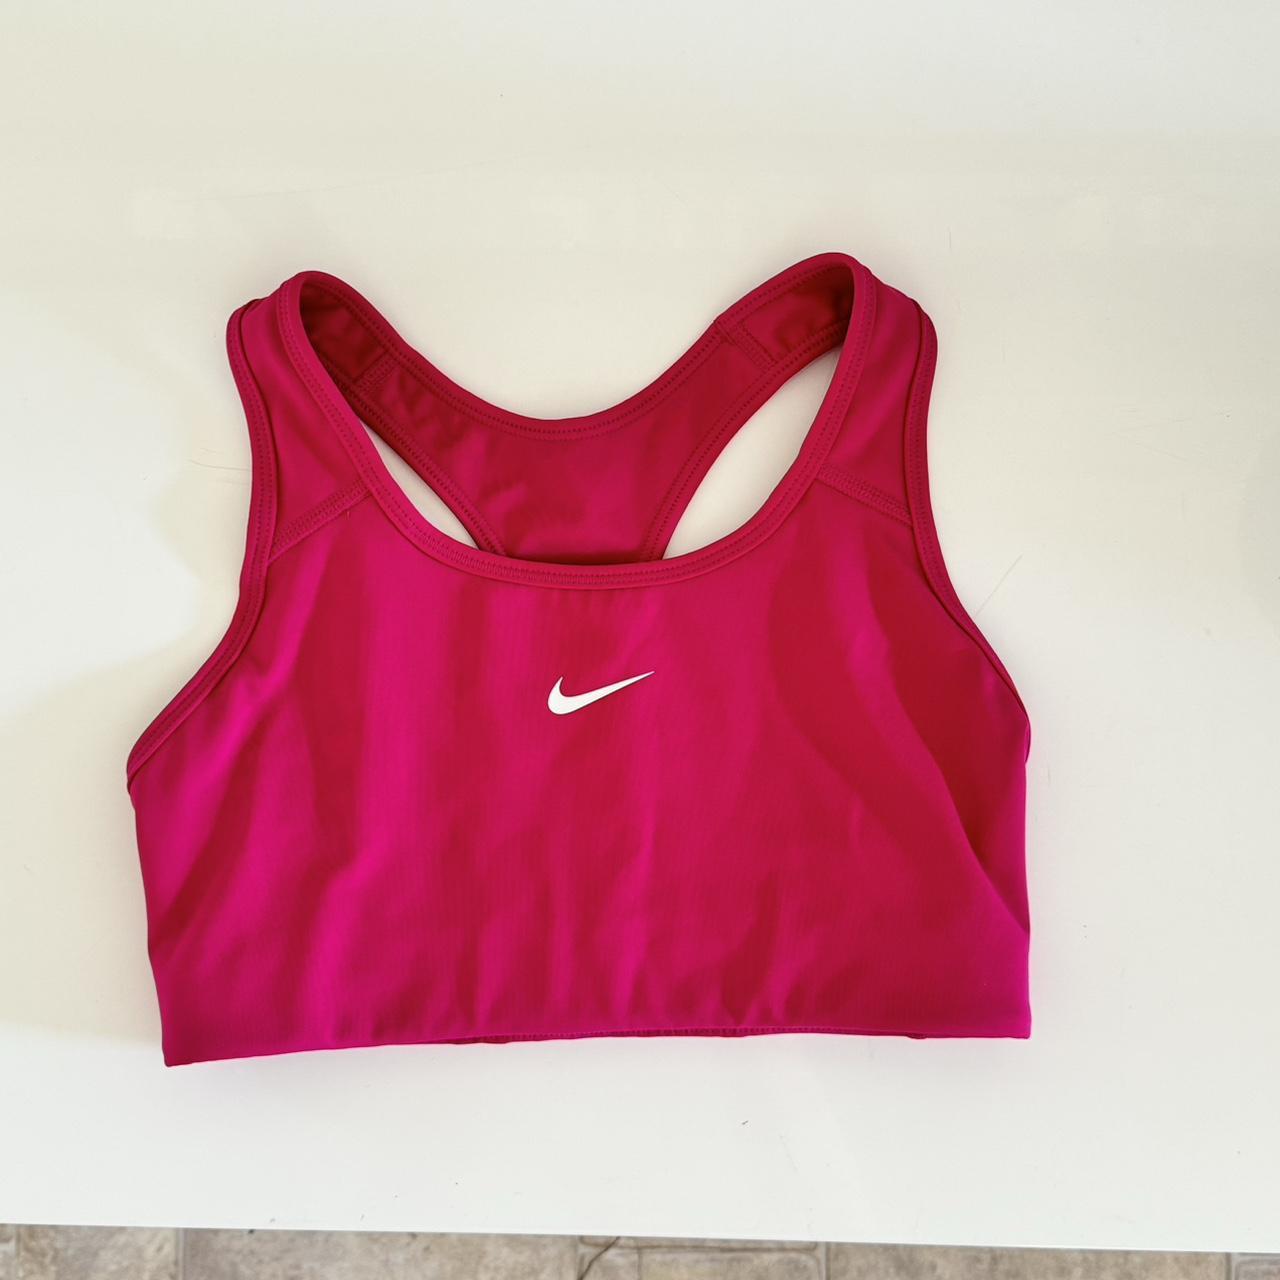 Hot Pink Nike sports bra. Size small but is on the - Depop